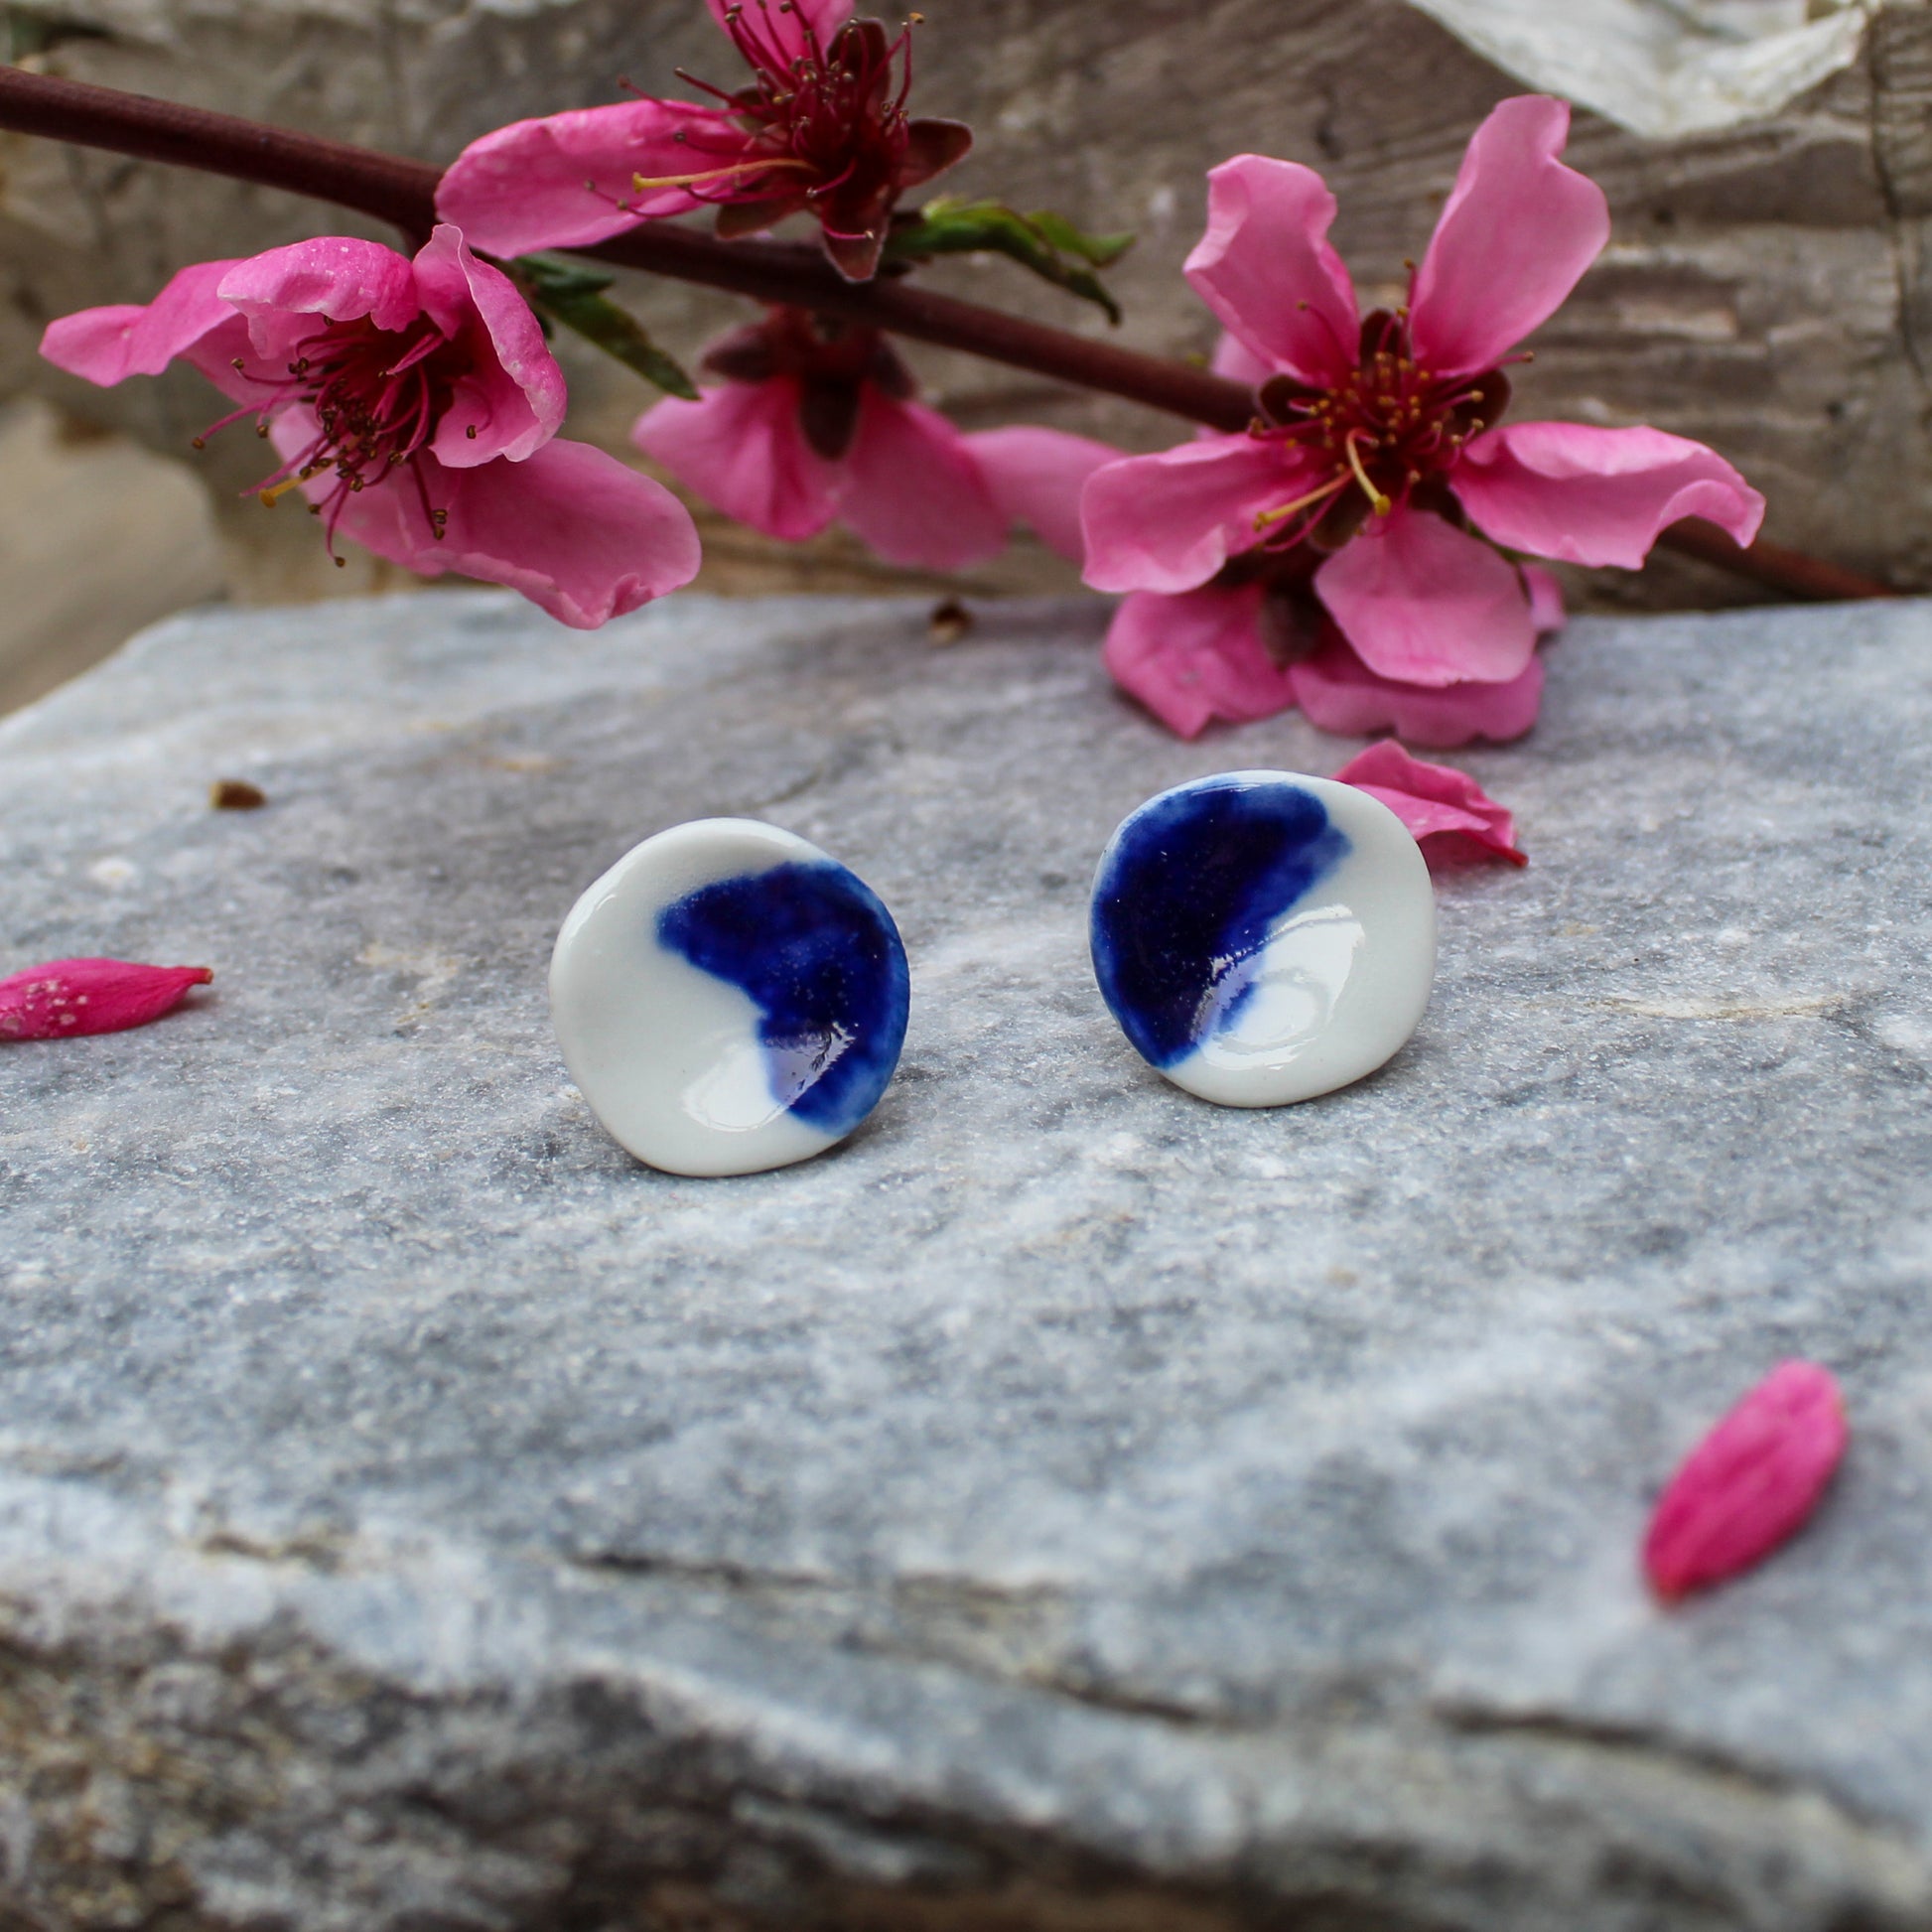 Little circle stud earrings made from white porcelain and blue stain with stainless steel posts.  Diameter of earrings is 1.80cm